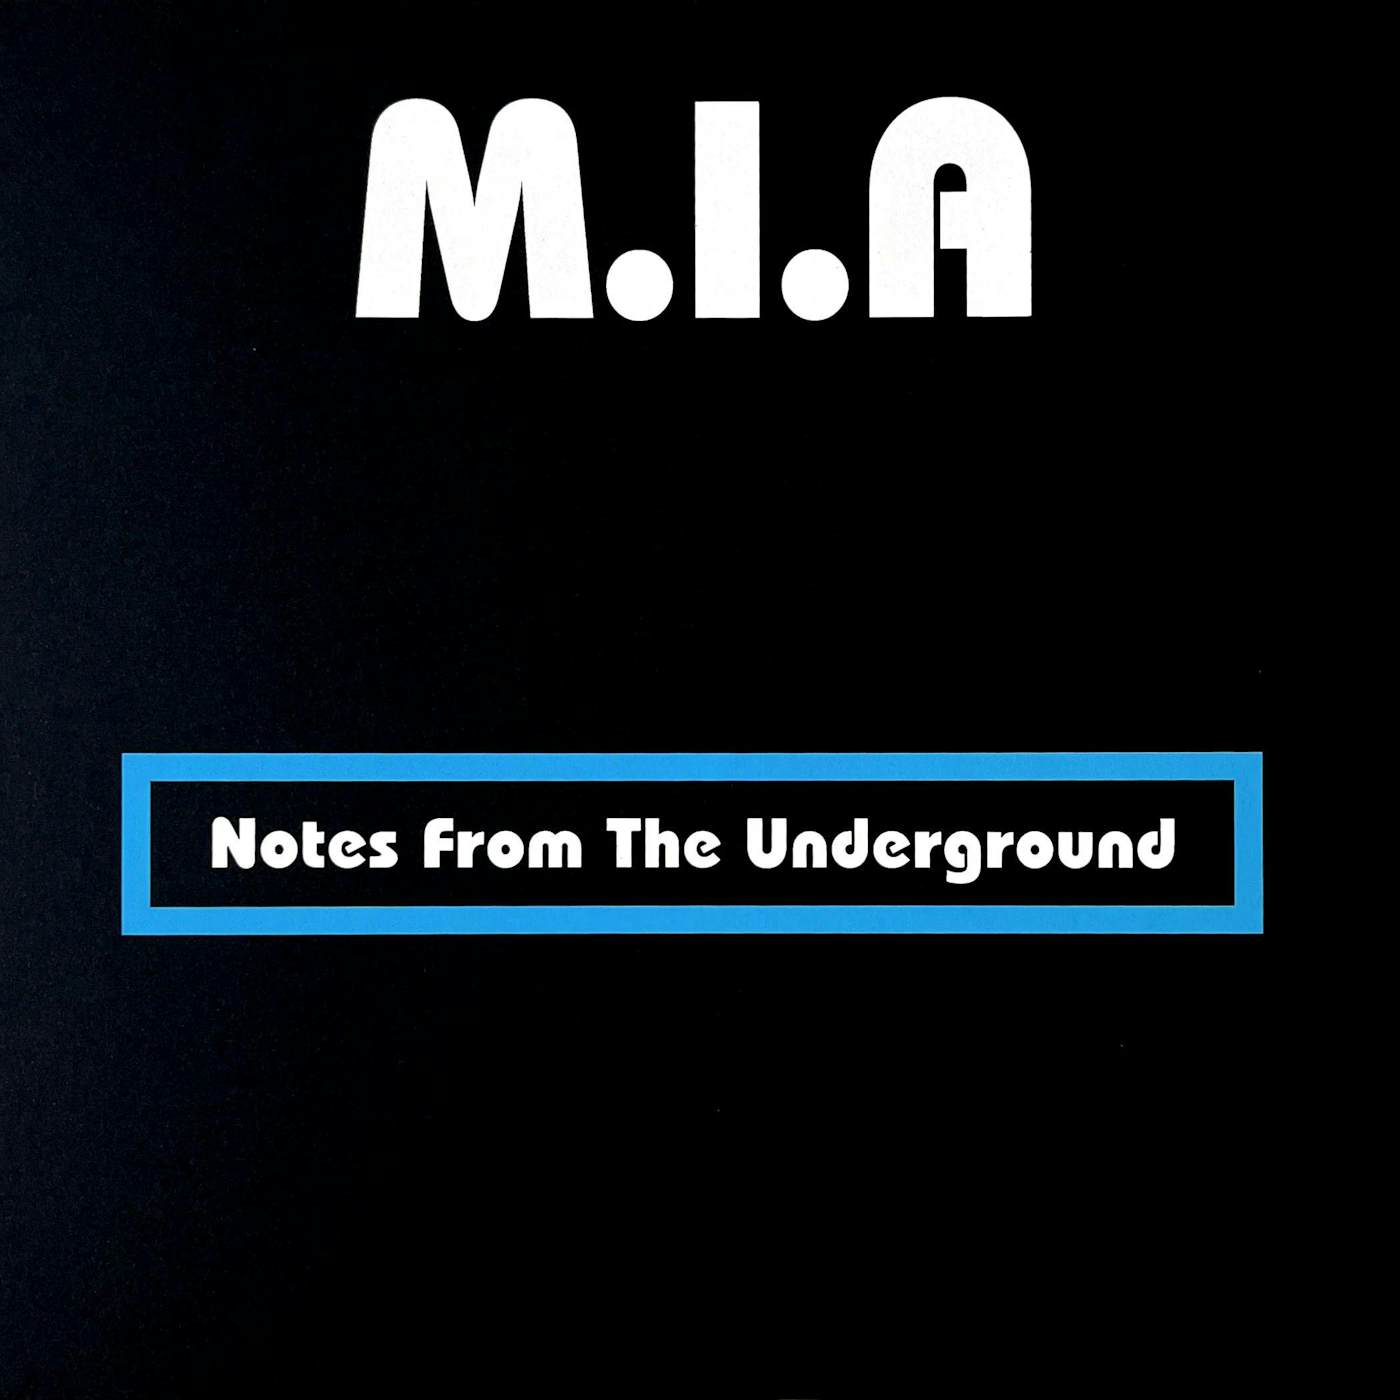 M.I.A. Notes From The Underground + After The Fact Vinyl Record